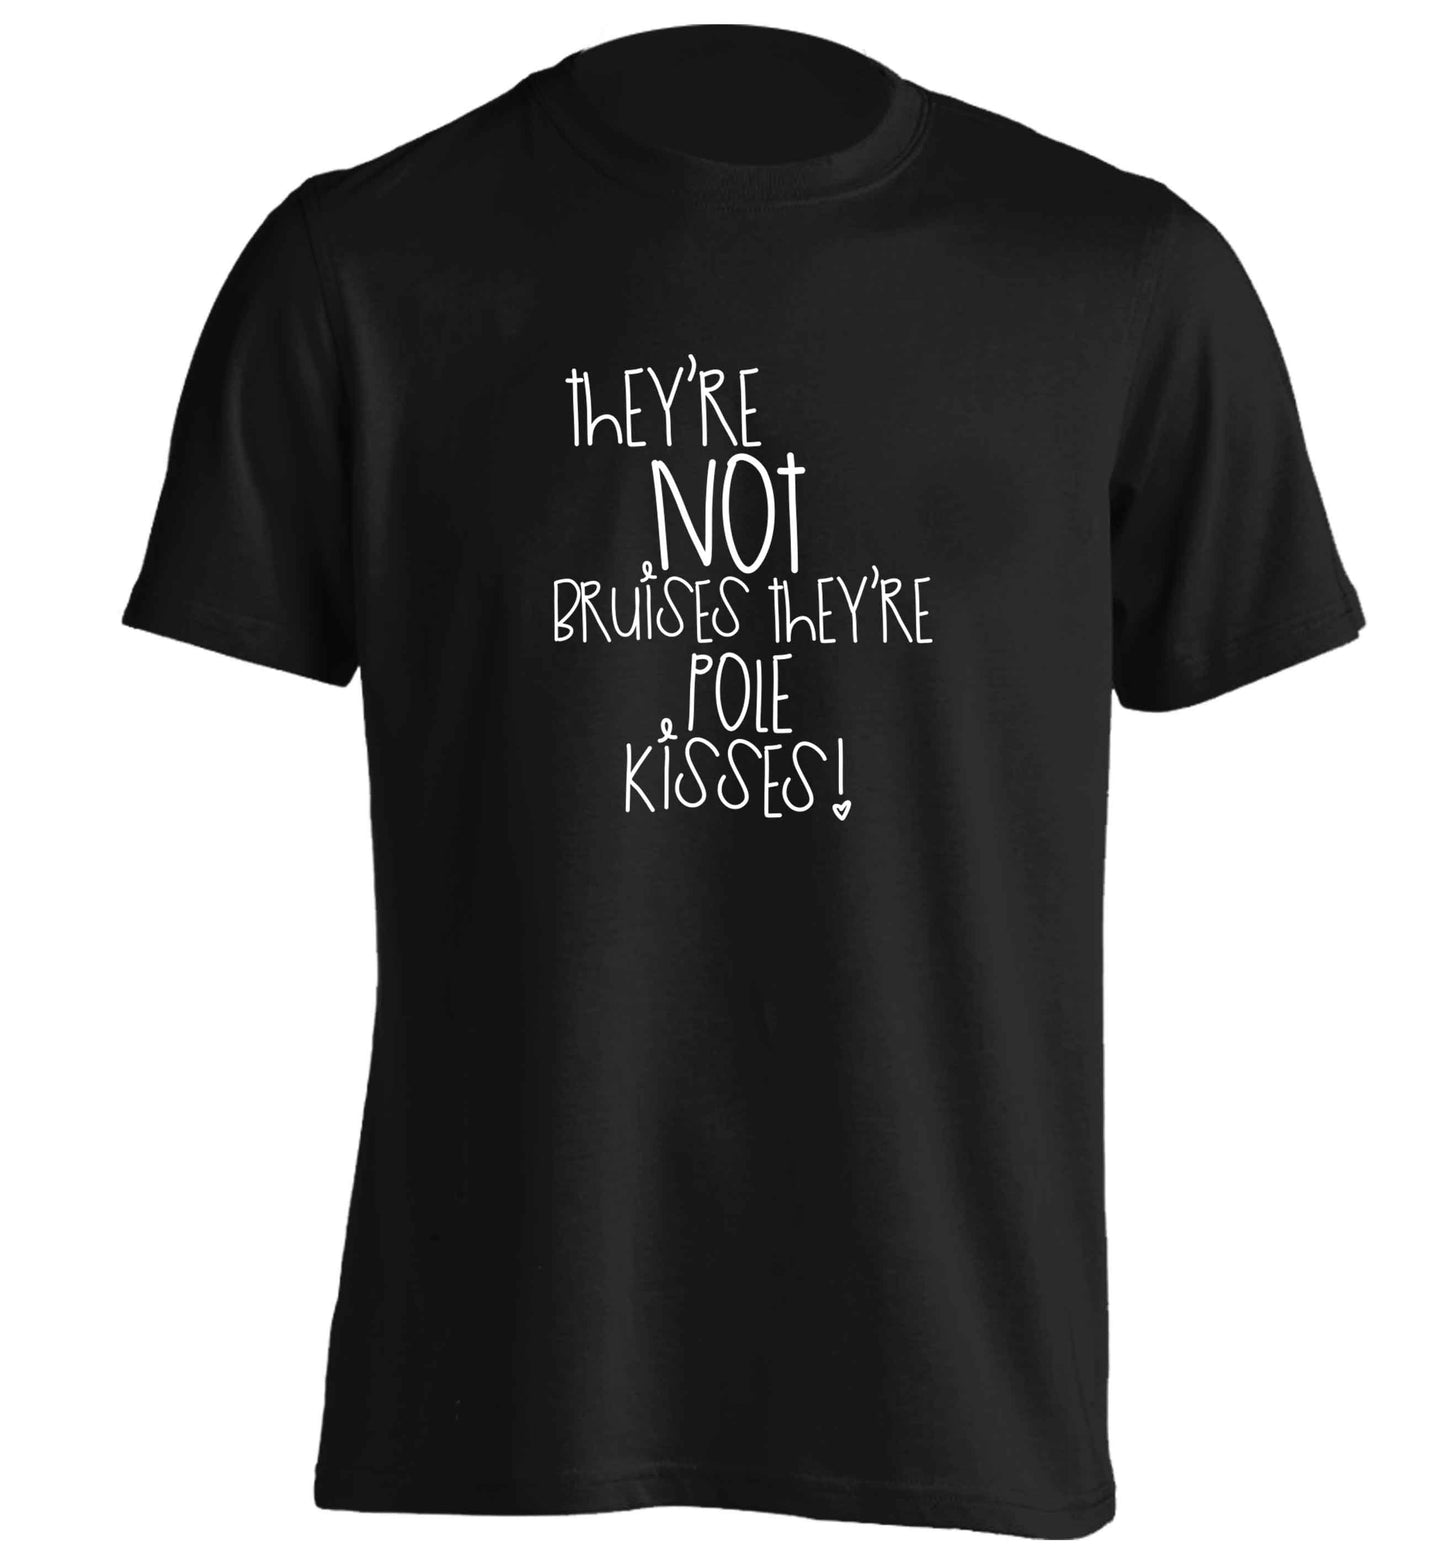 They're not bruises they're pole kisses adults unisex black Tshirt 2XL